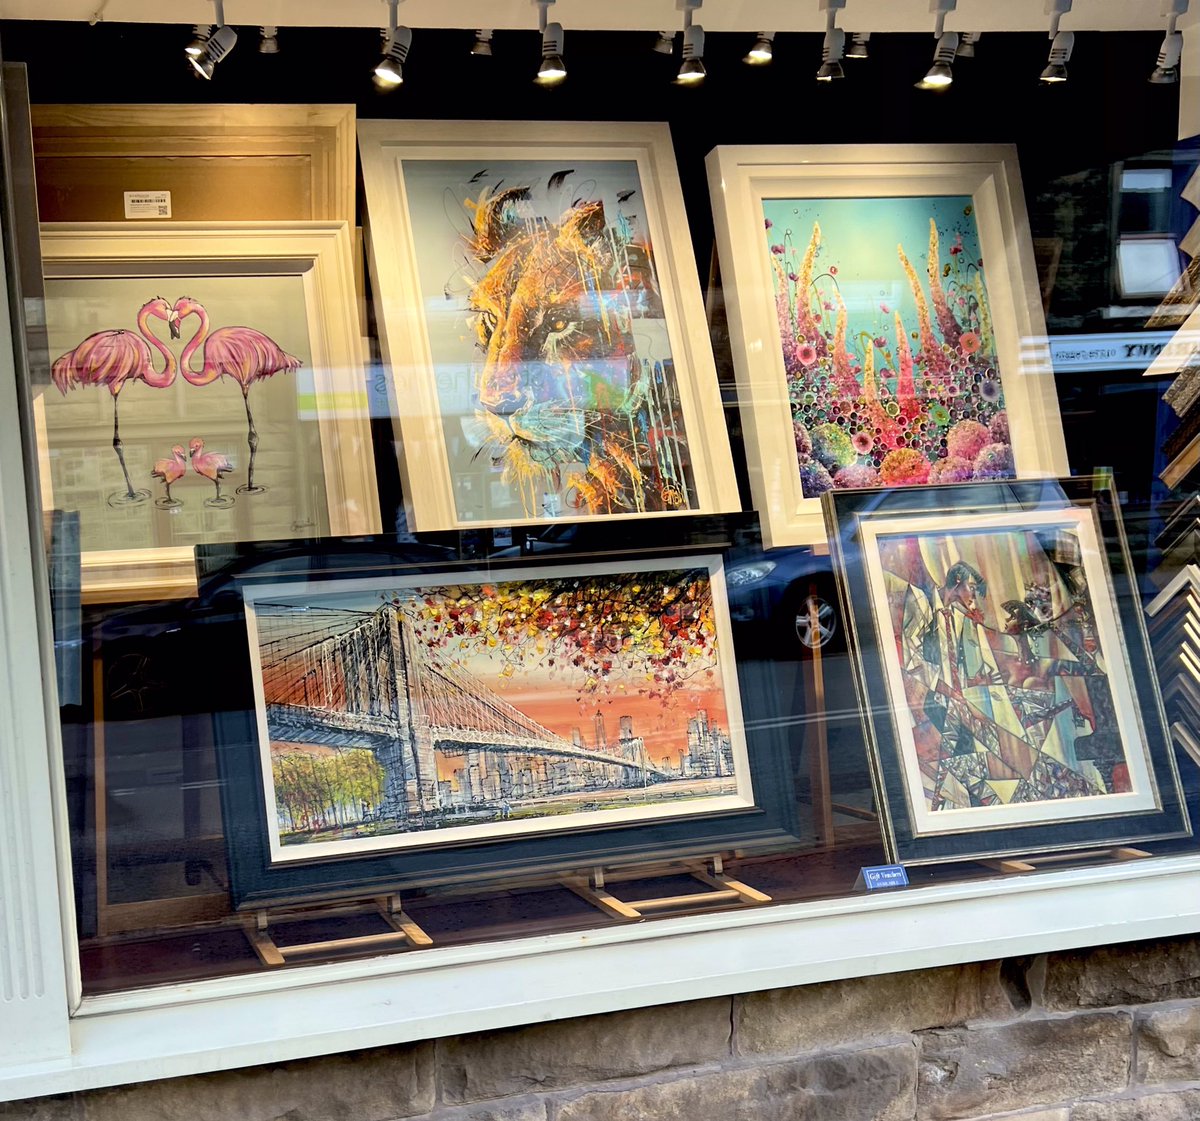 Have seen our new window? 
Which is your favourite?
All details are on our website or call into our gallery on Berry Lane #art #framing #sculpture #longridgegallery #longridge #ribblevalley #amylouise #joegalindo #leannechristie #nigelcooke #andreiprotsouk #kindnessmatters 🎨🎨🎨